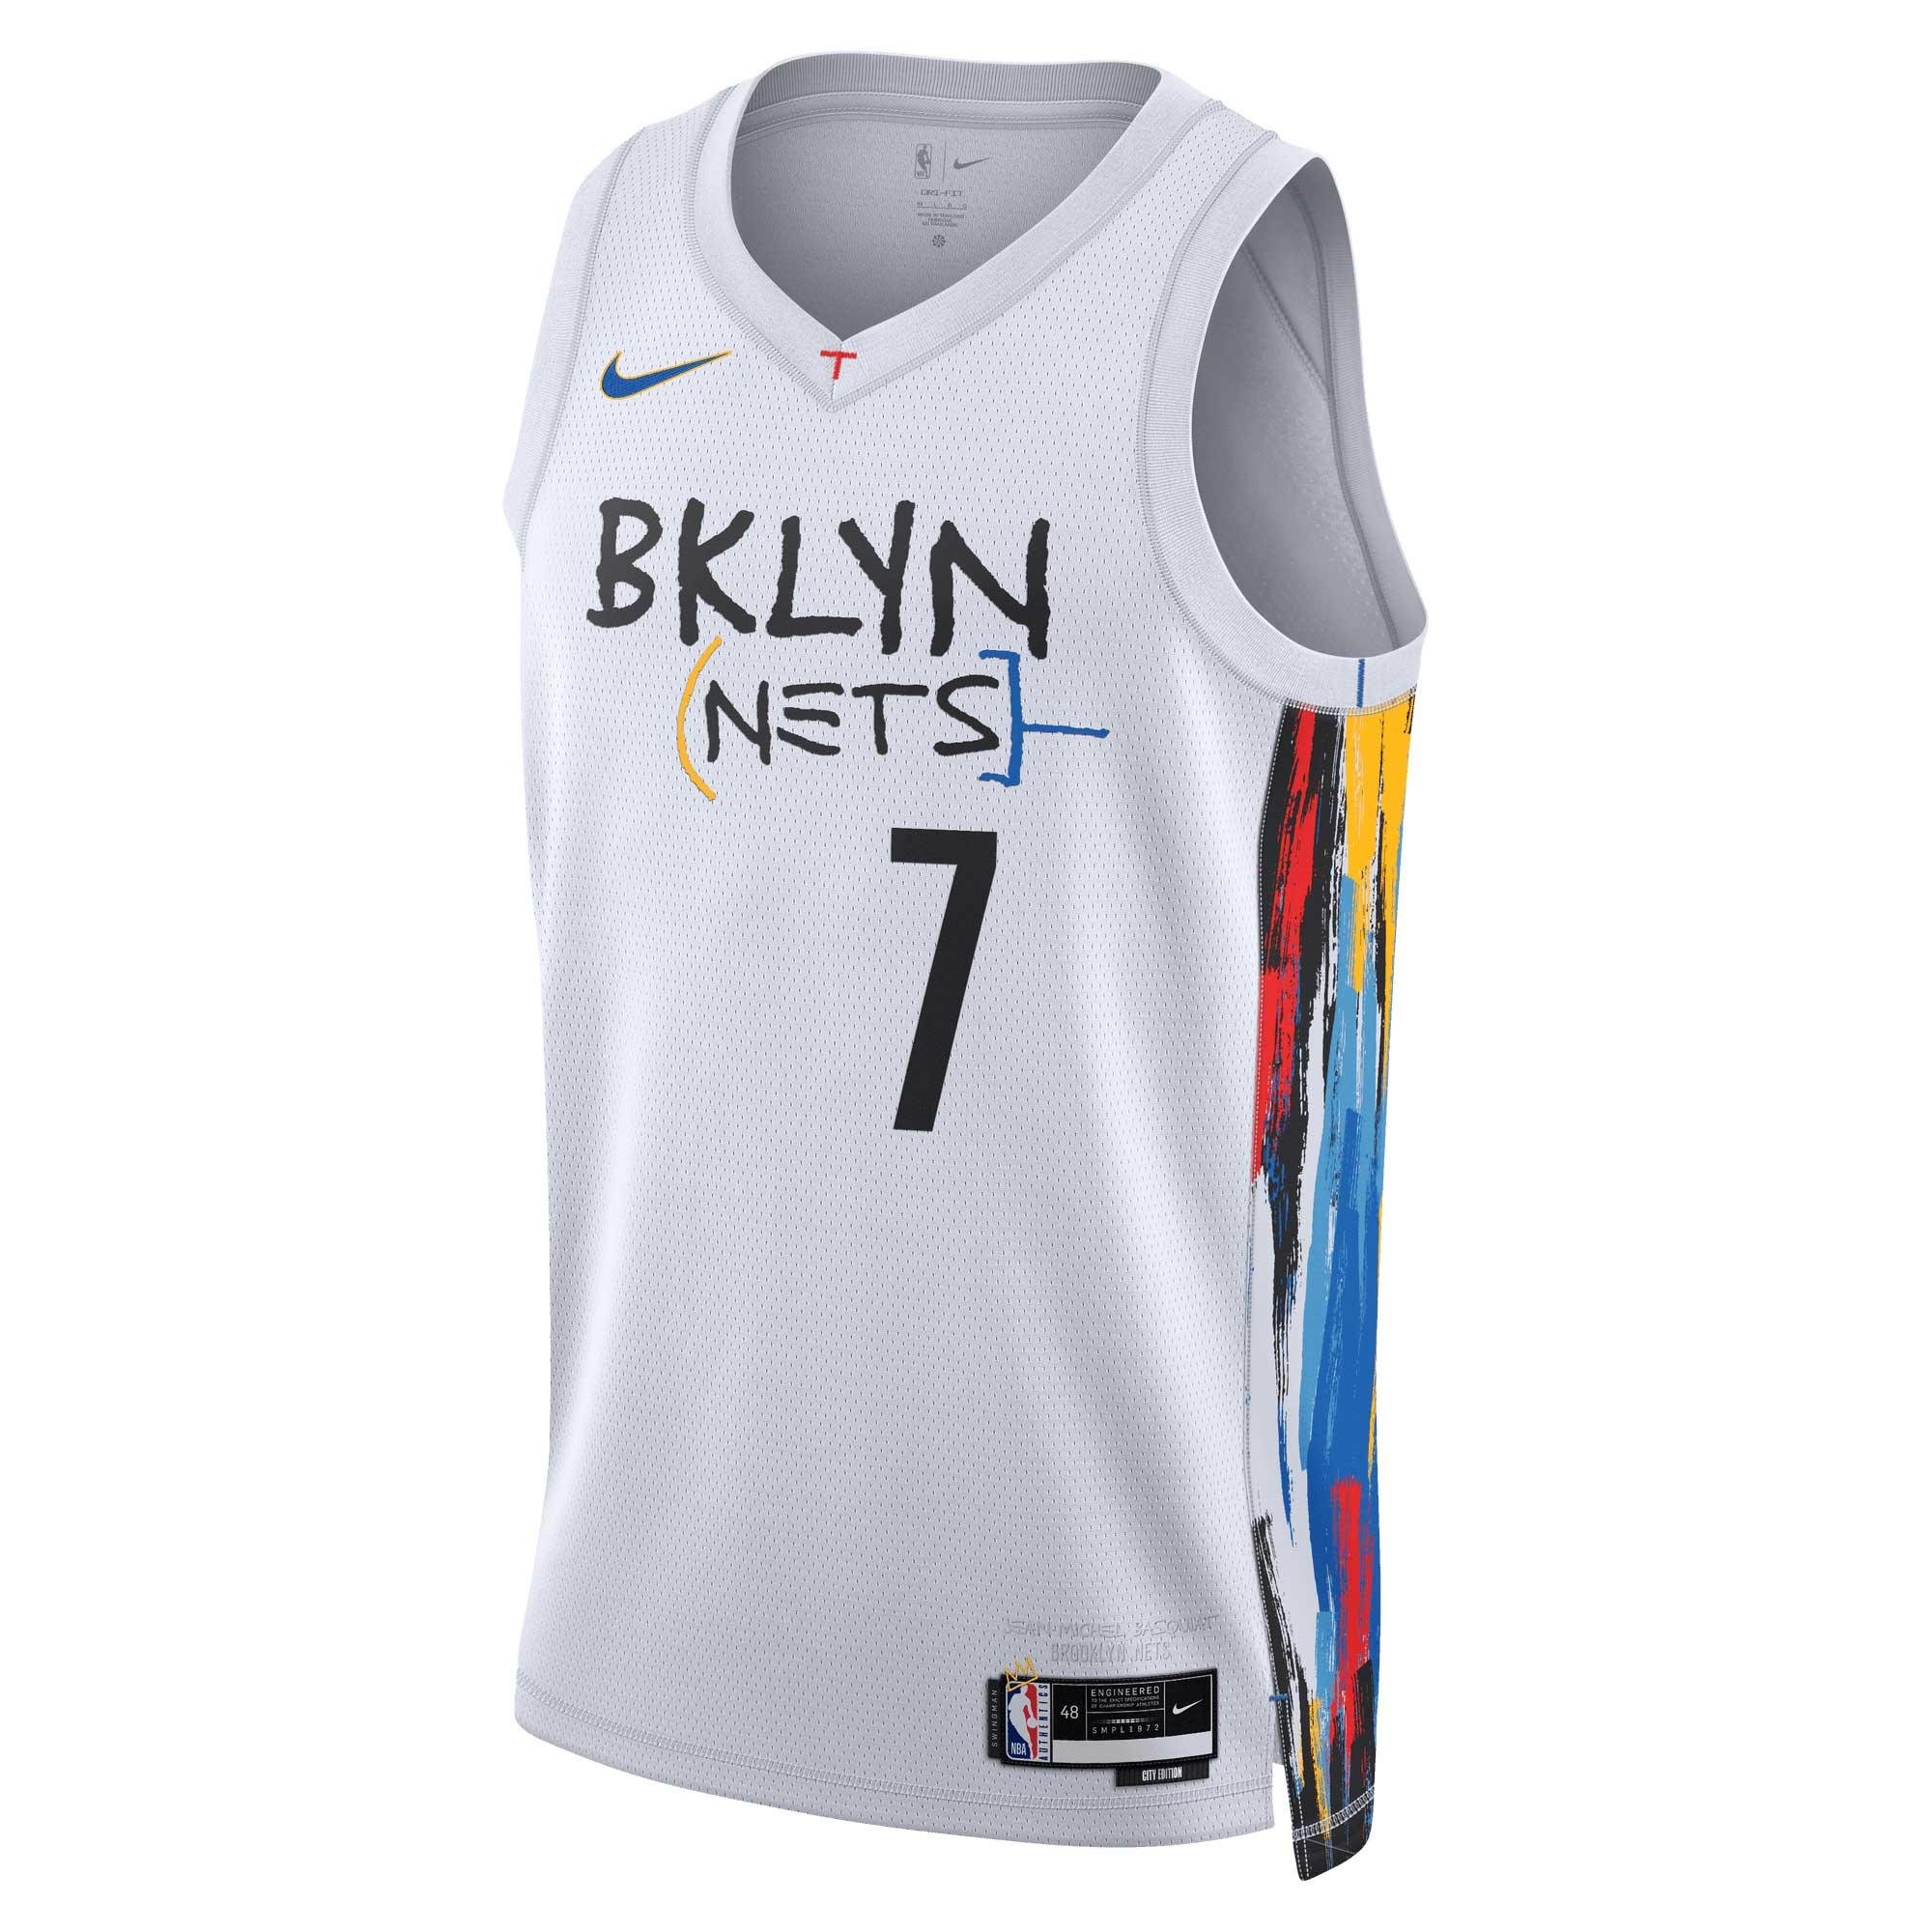 Kevin Durant Nets Jersey, KD Nets Jersey, Shirts, Kevin Durant